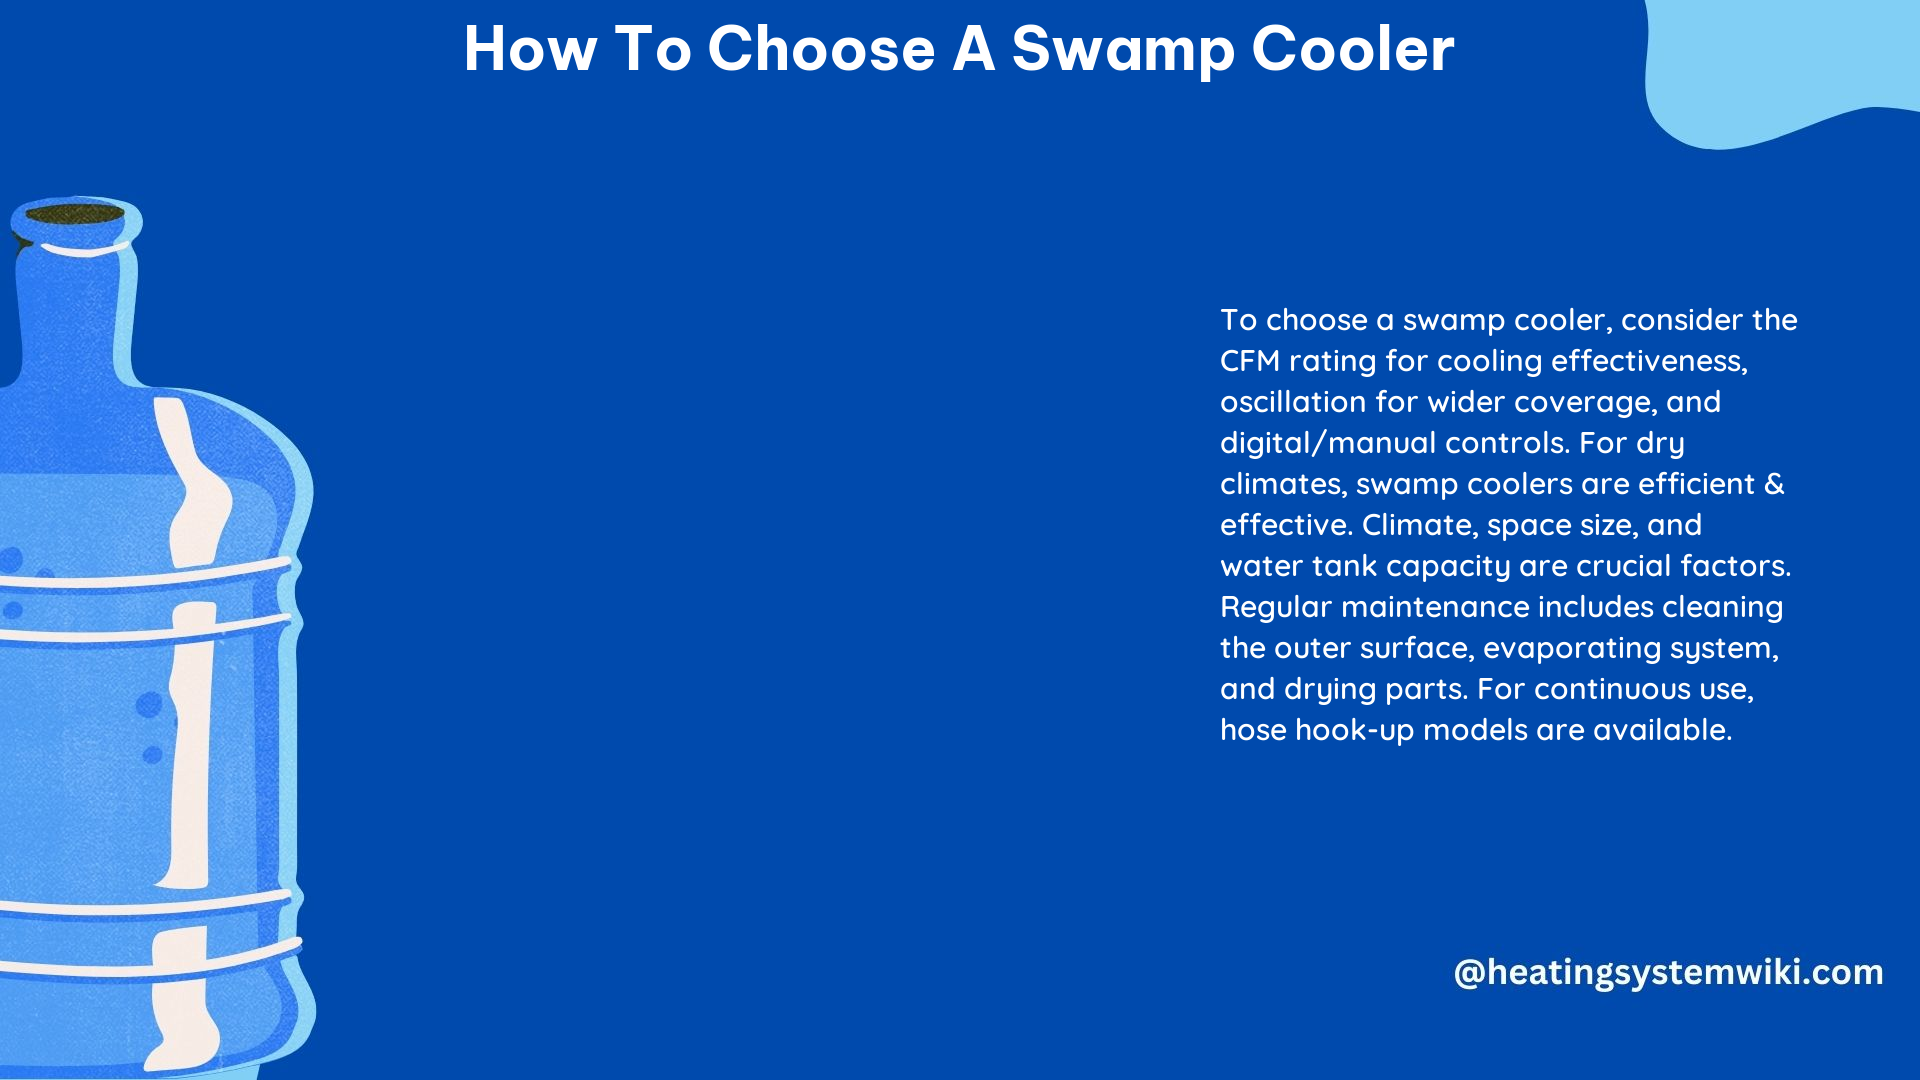 How to Choose a Swamp Cooler